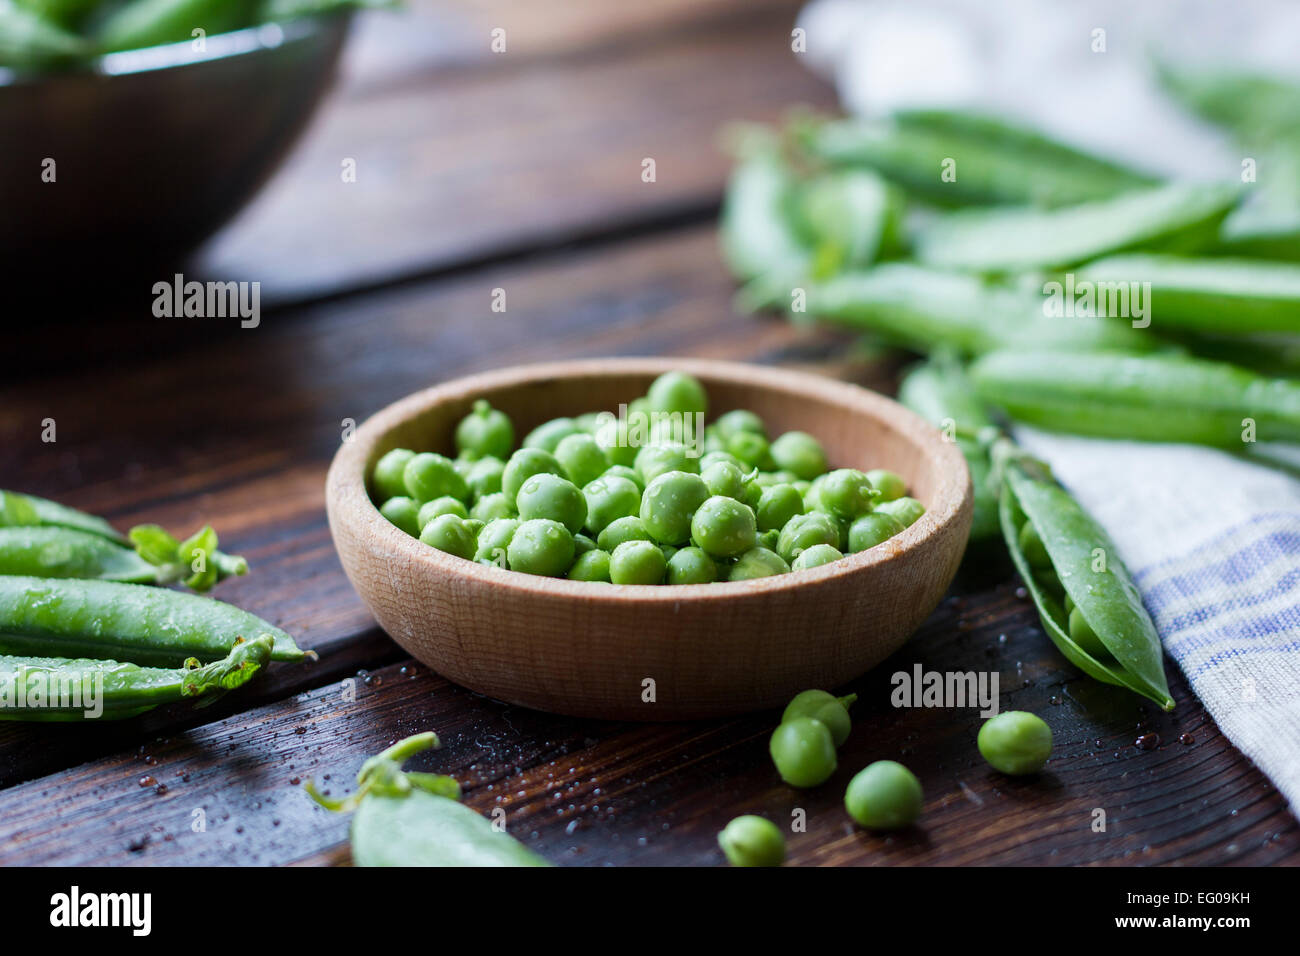 Peas in a bowl Stock Photo